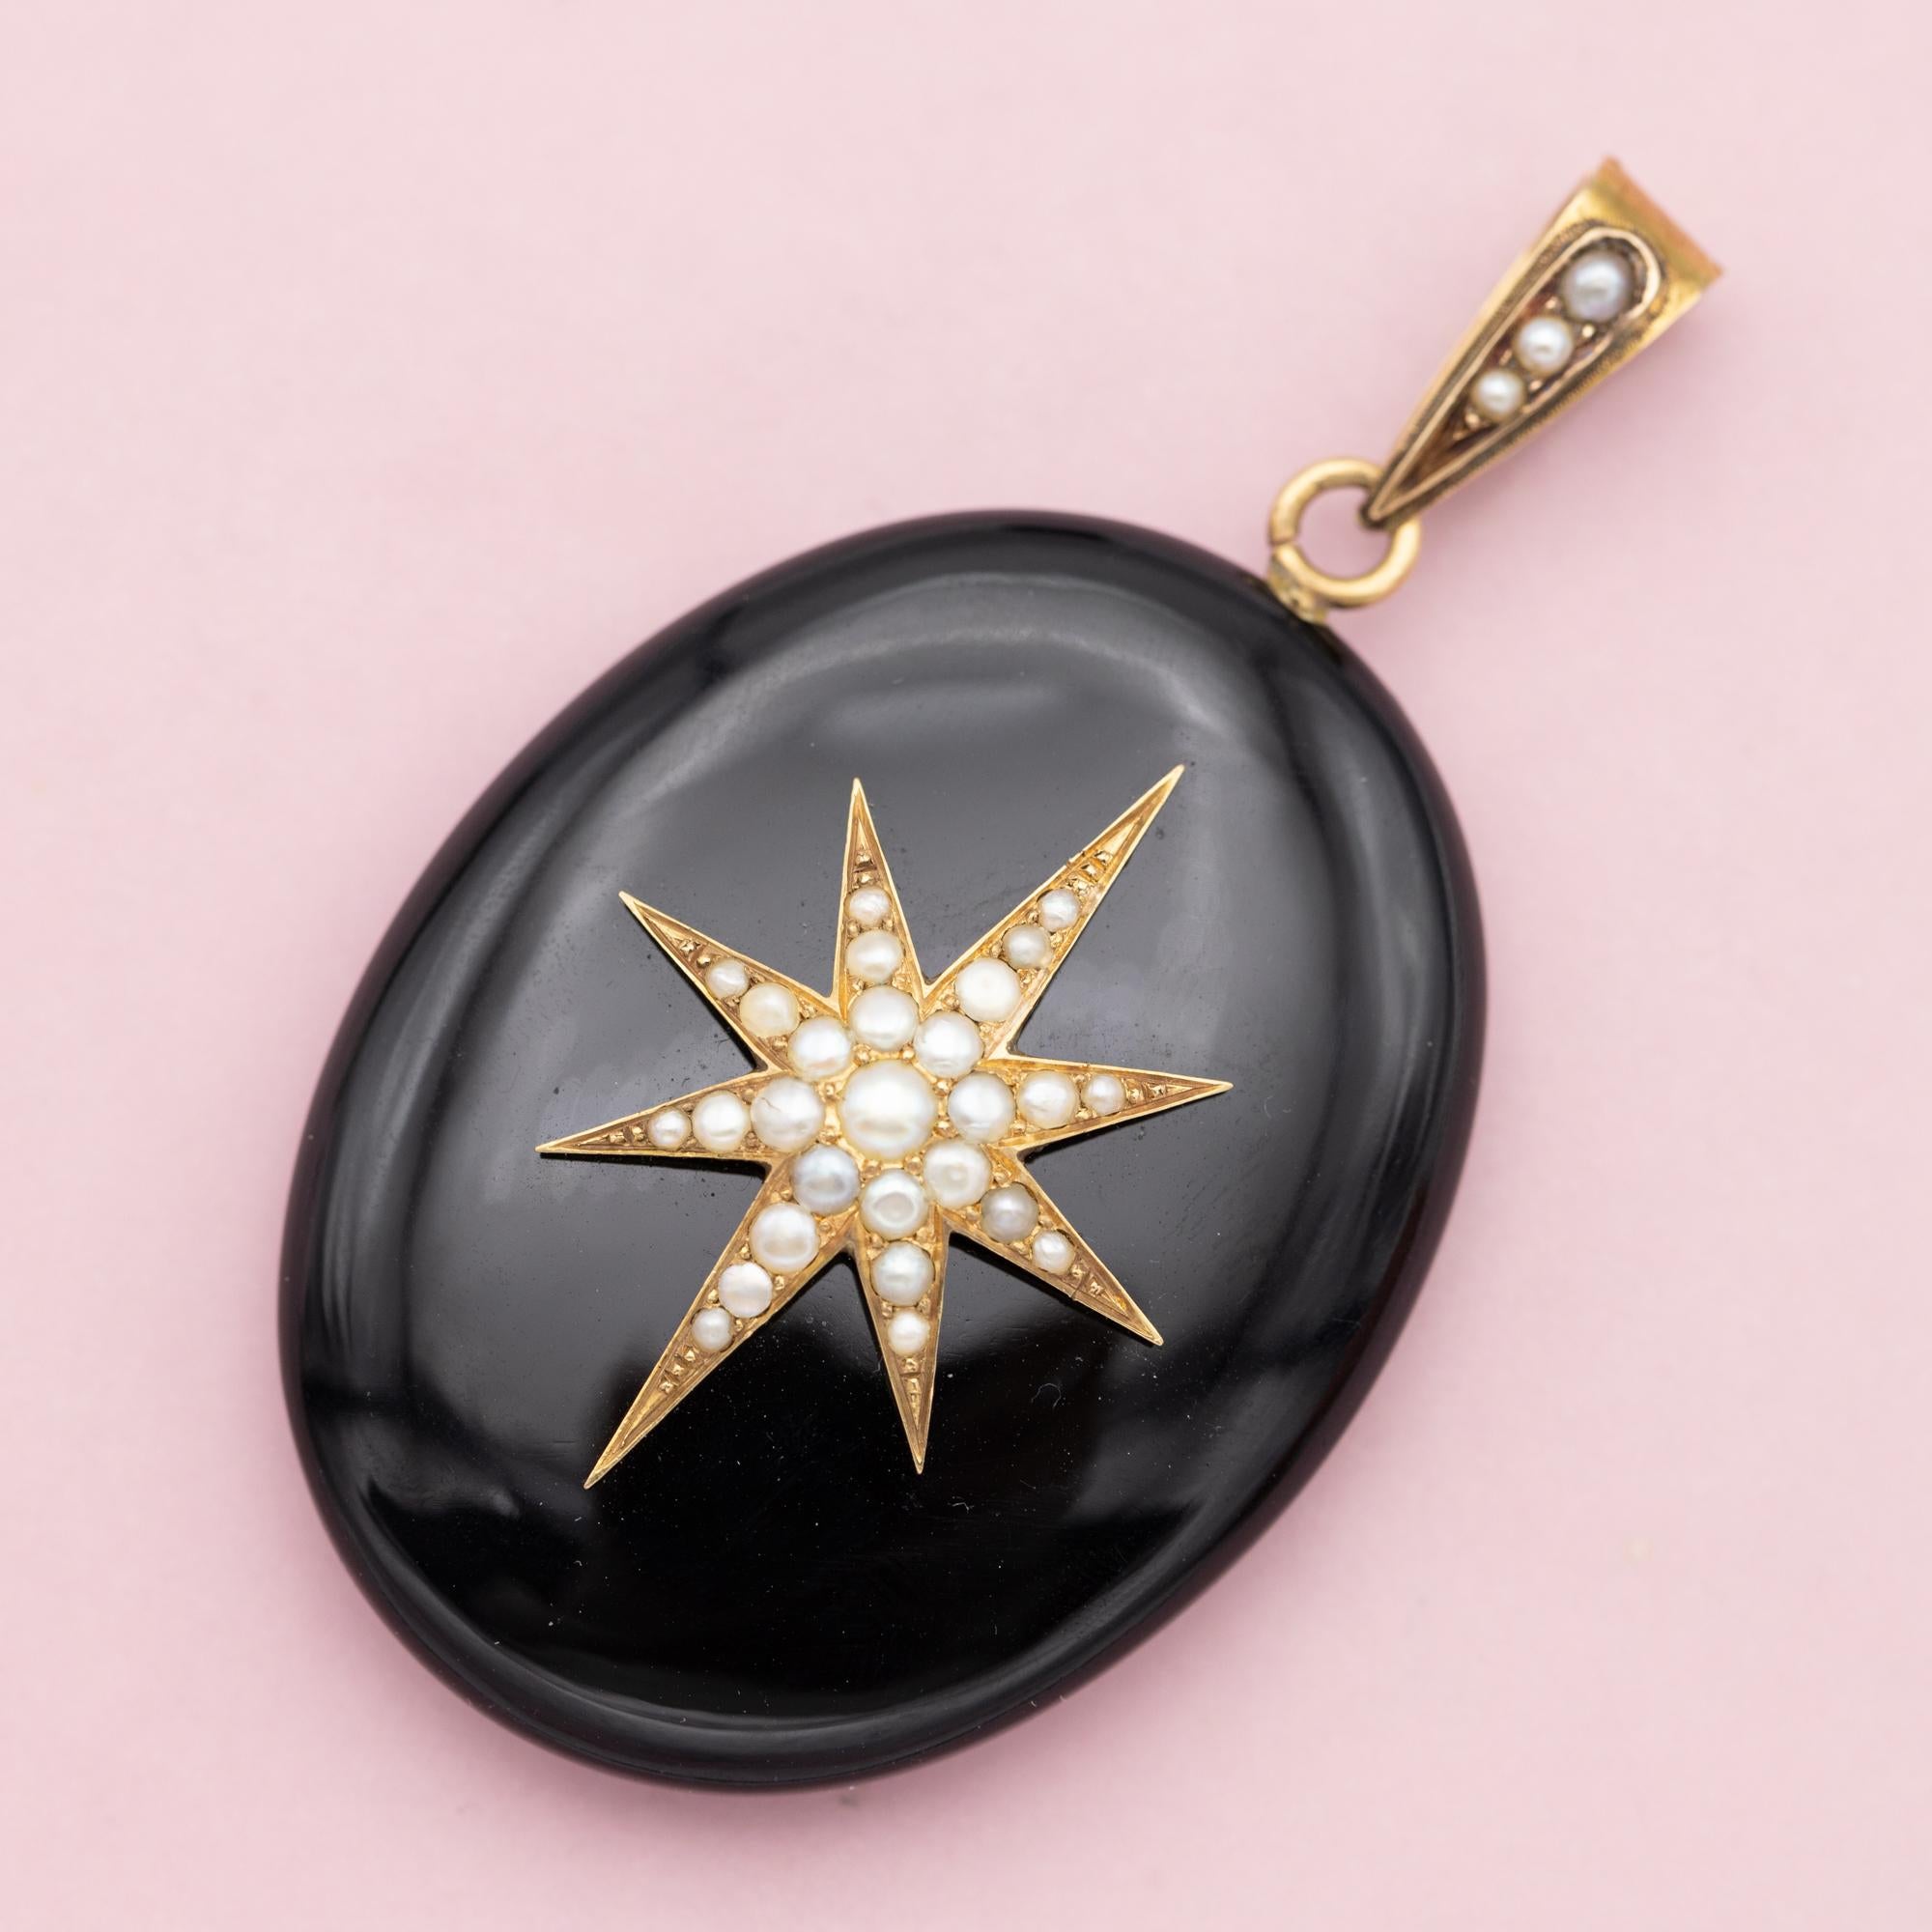 heavy 18K mourning pendant - solid gold Victorian Jet charm - Antique star 1870s 1